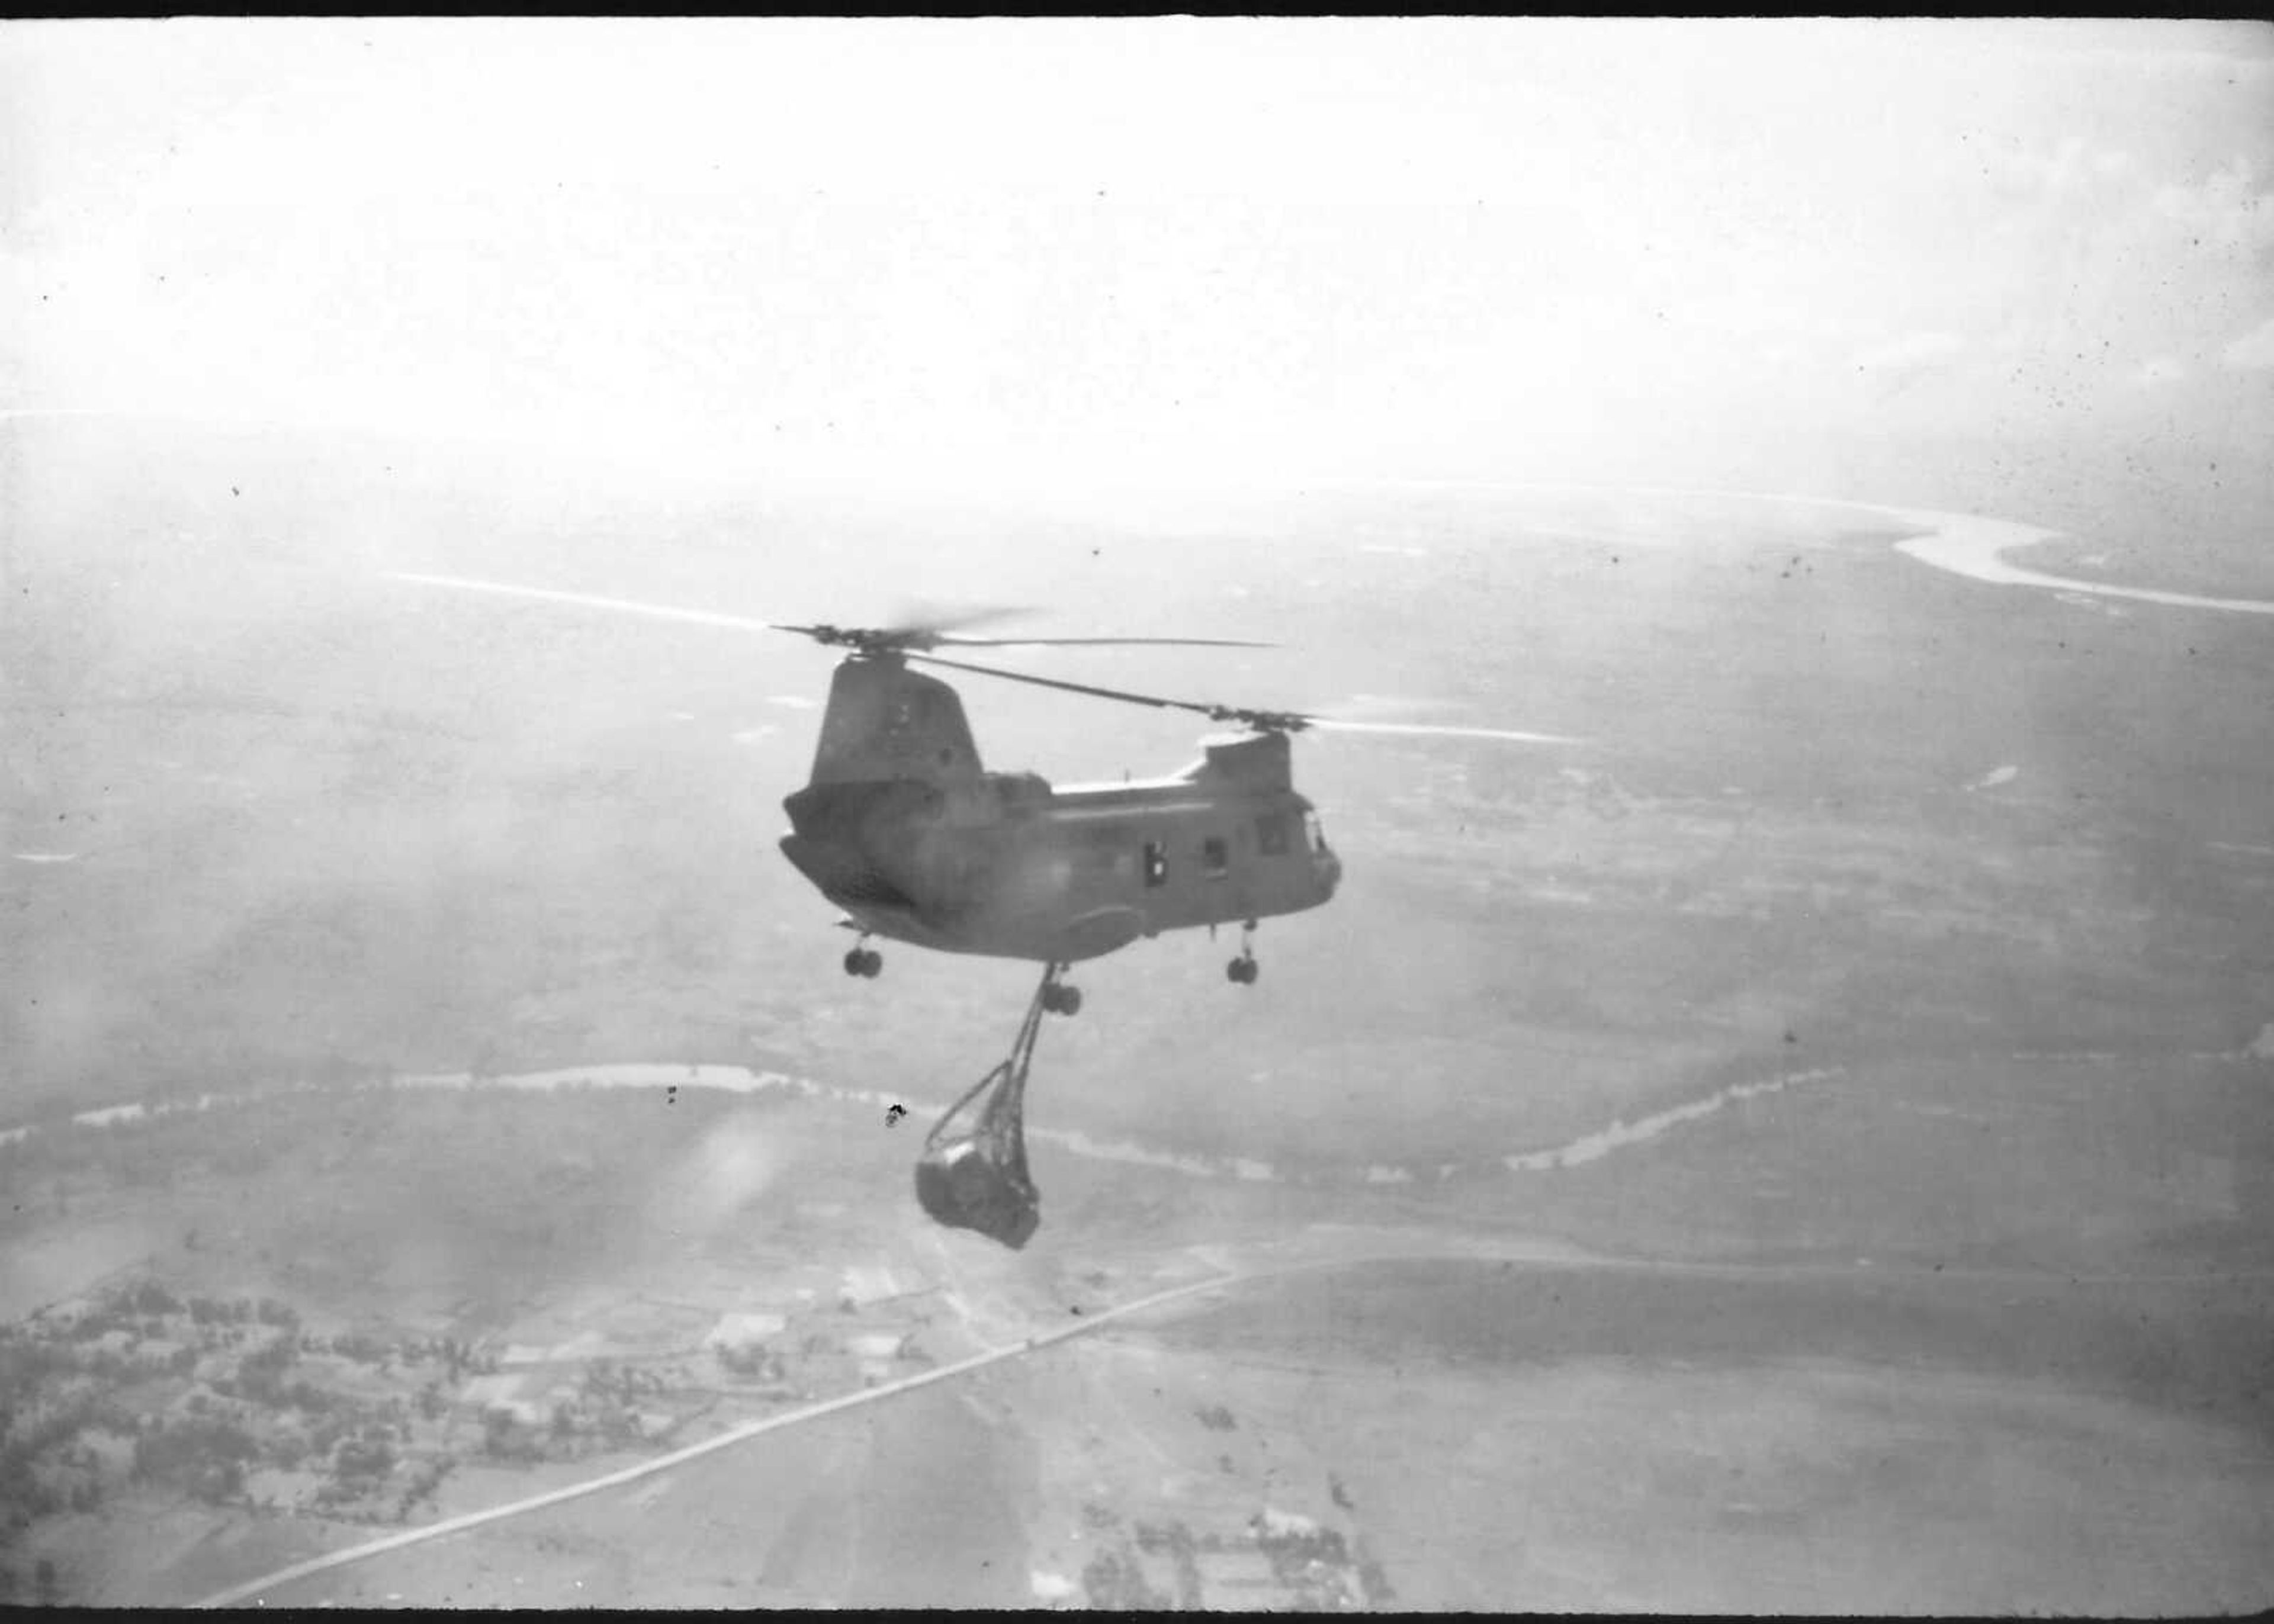 A CH-46 helicopter, piloted by First Lt. Harold Walker, resupplying Marines in Vietnam, 1969-1970.